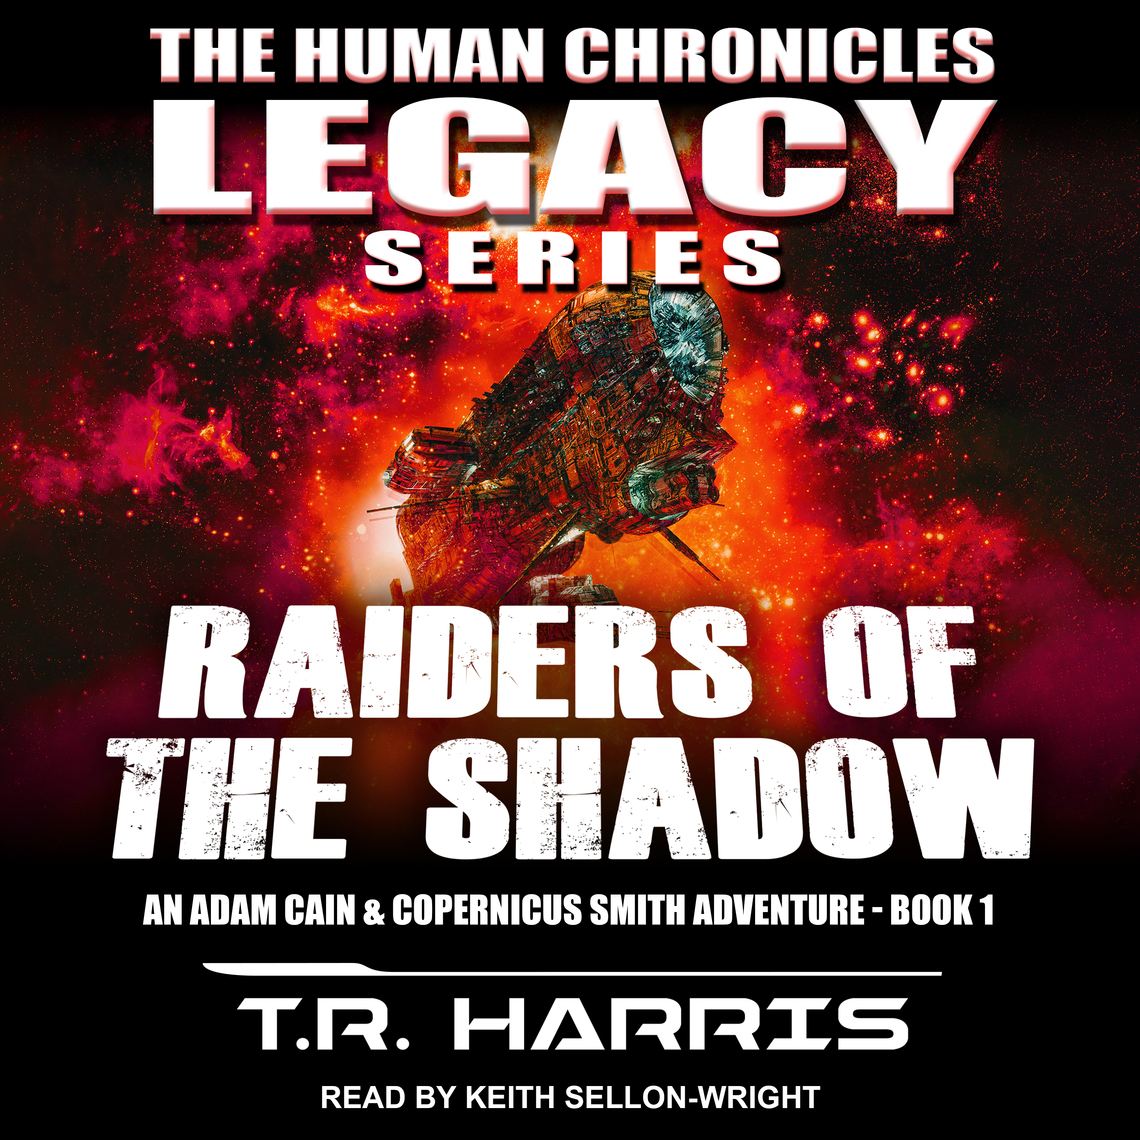 Raiders of the Shadow by T.R. Harris (Audiobook) - Read free for